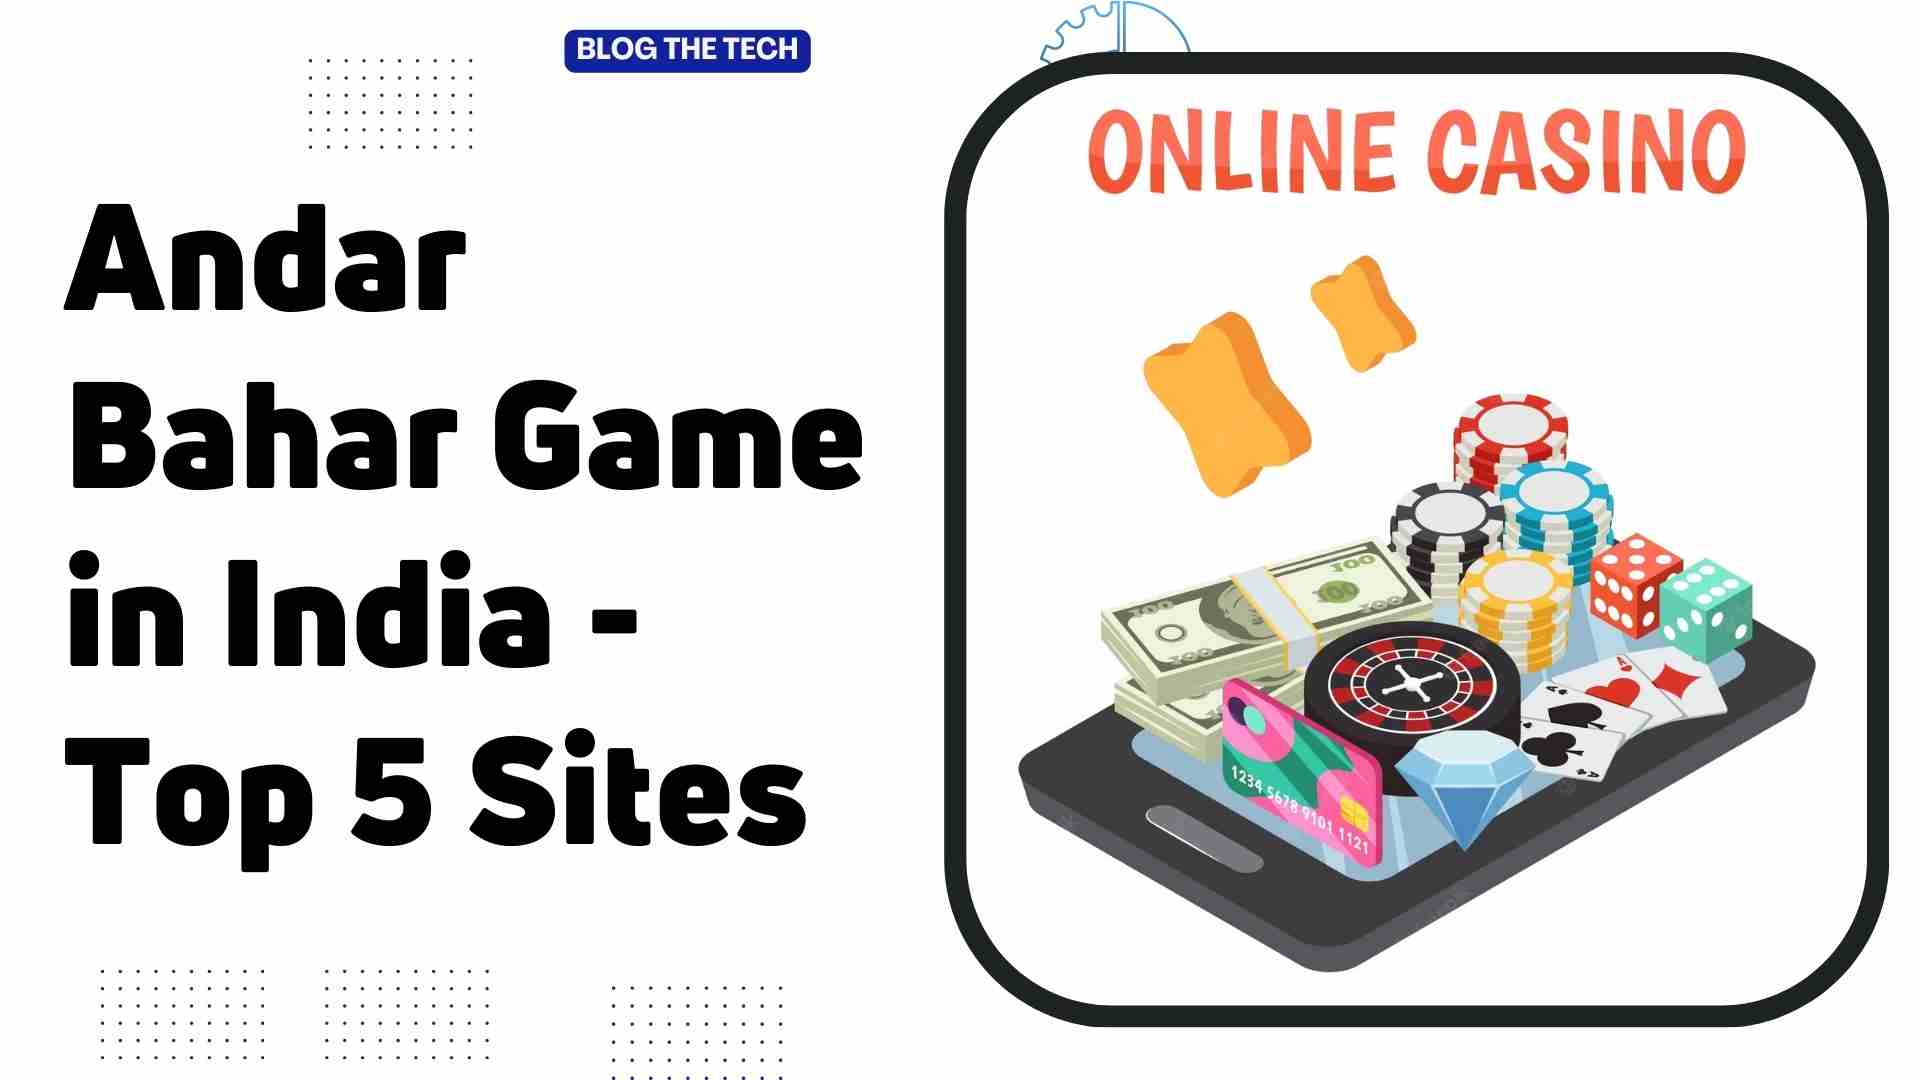 Andar Bahar Game in India - Top 5 Sites